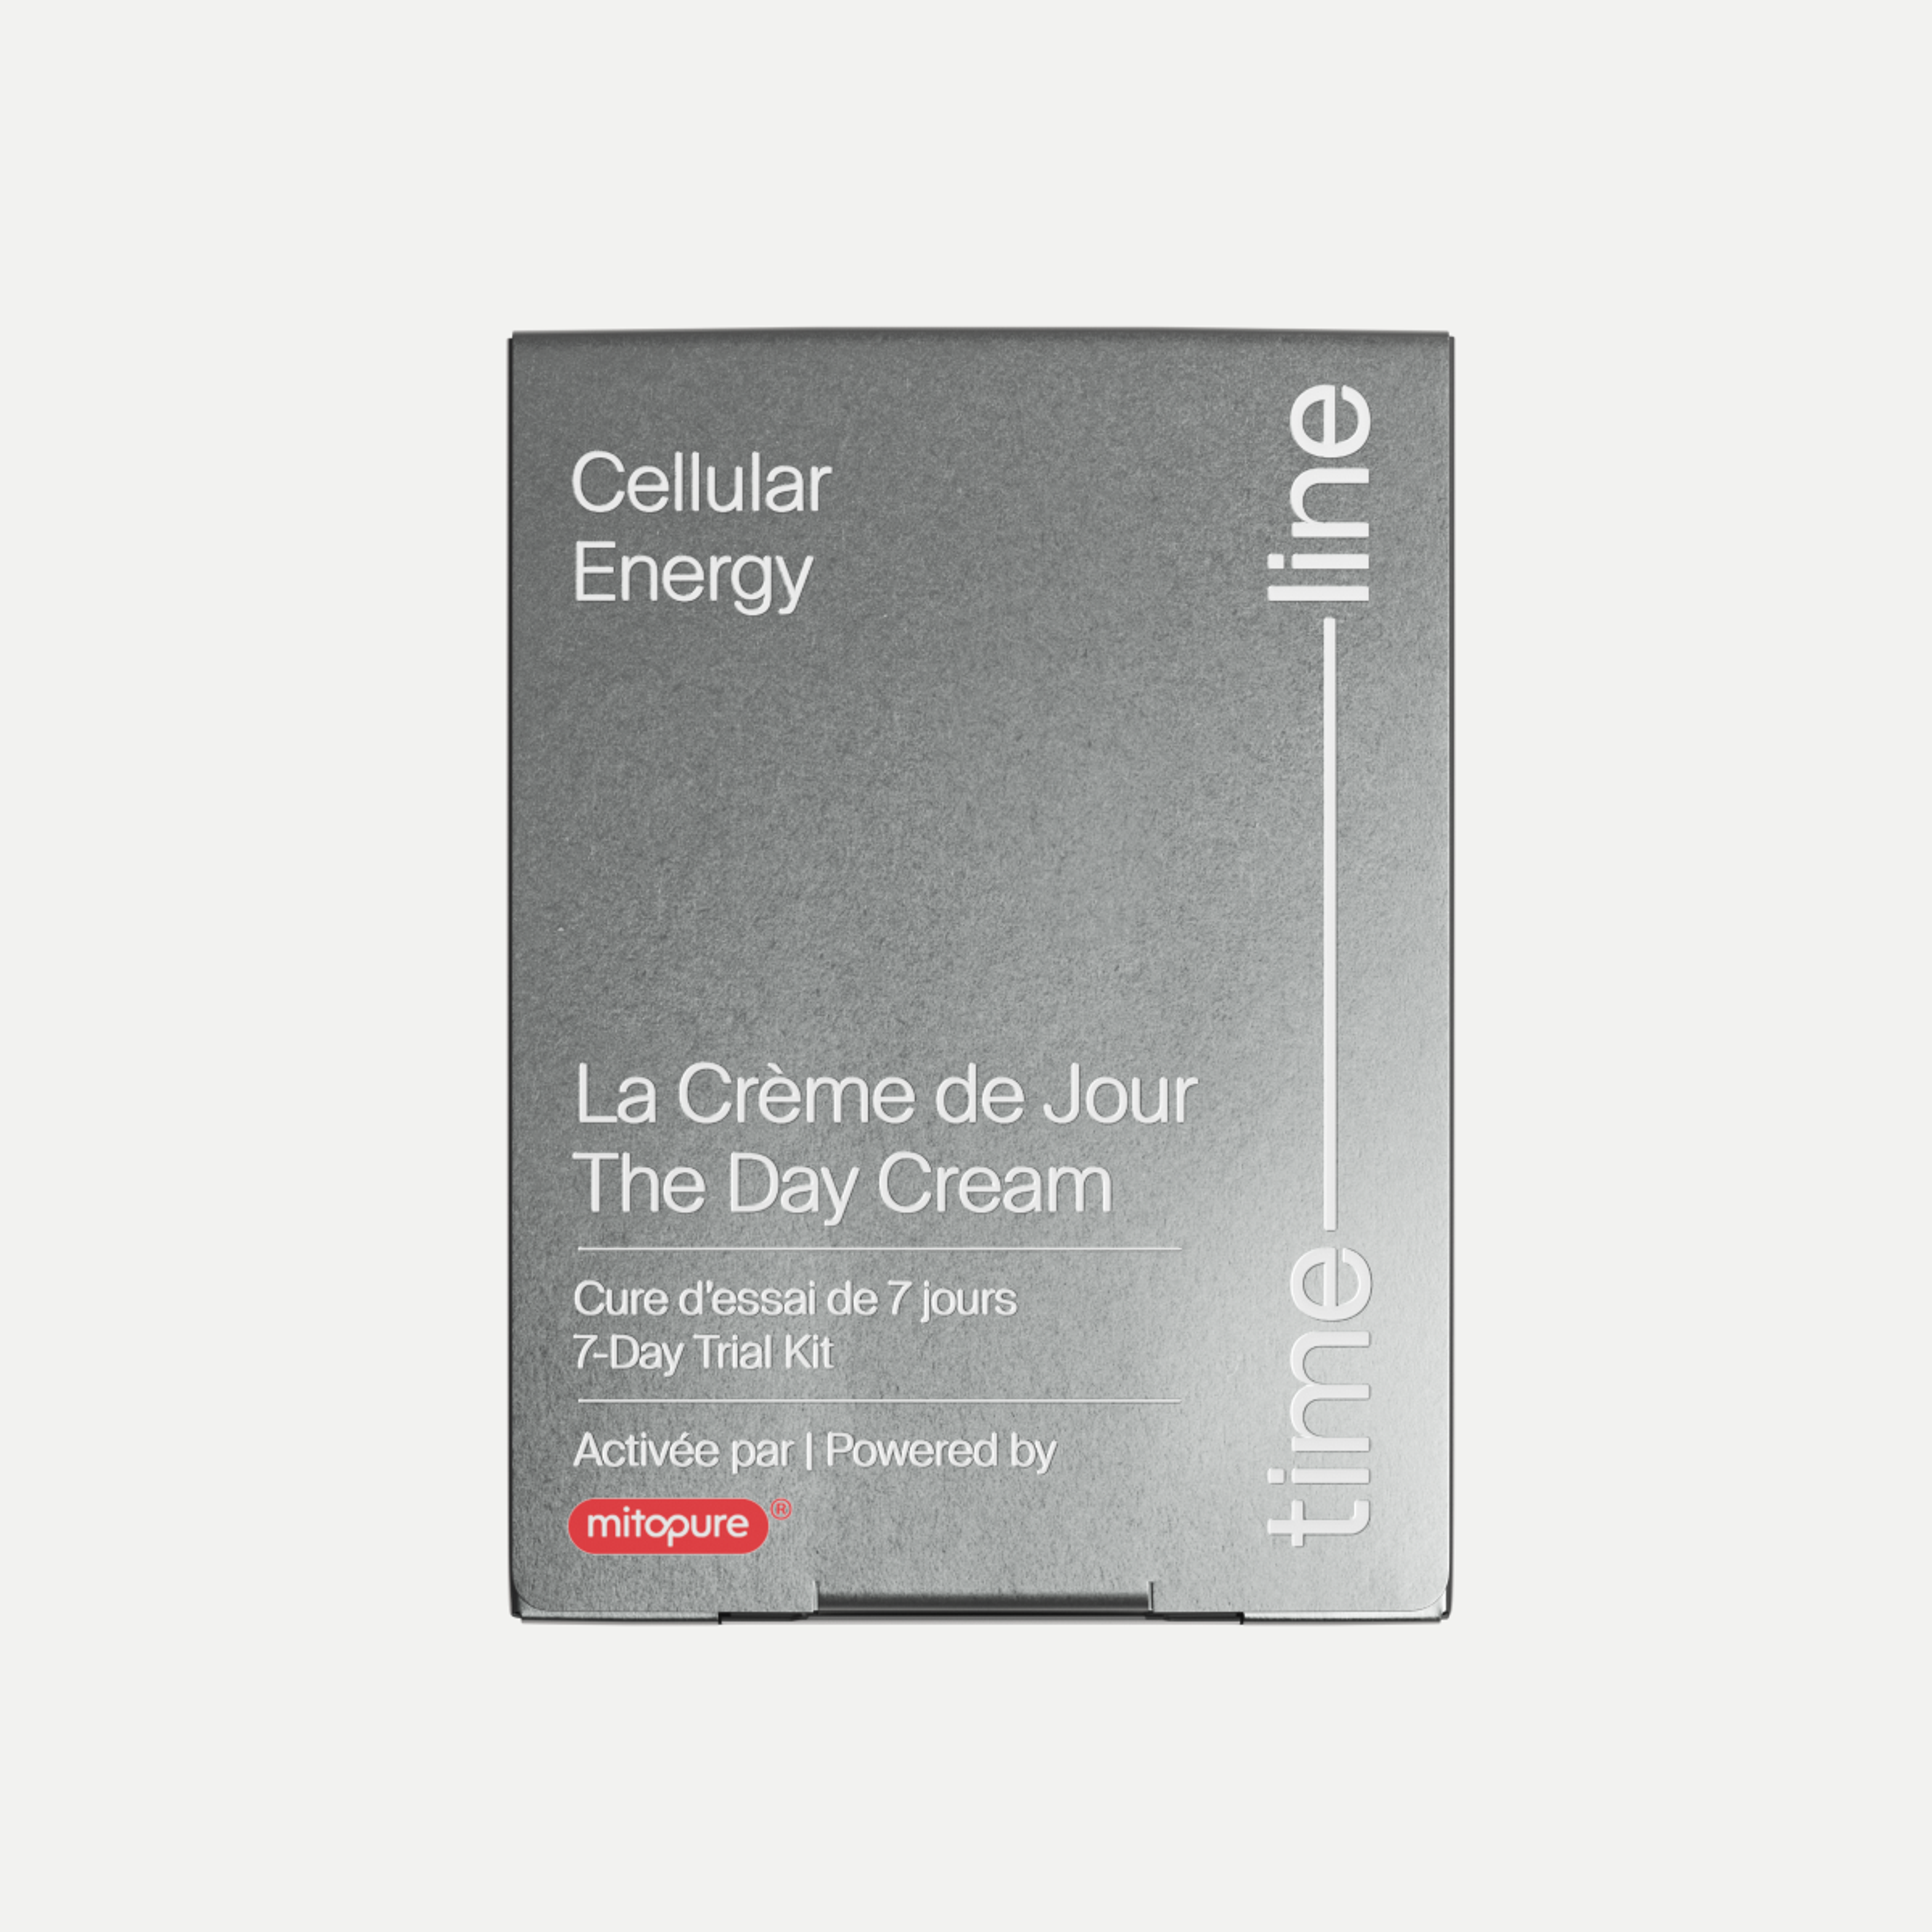 The Day Cream 7-Day Trial Kit